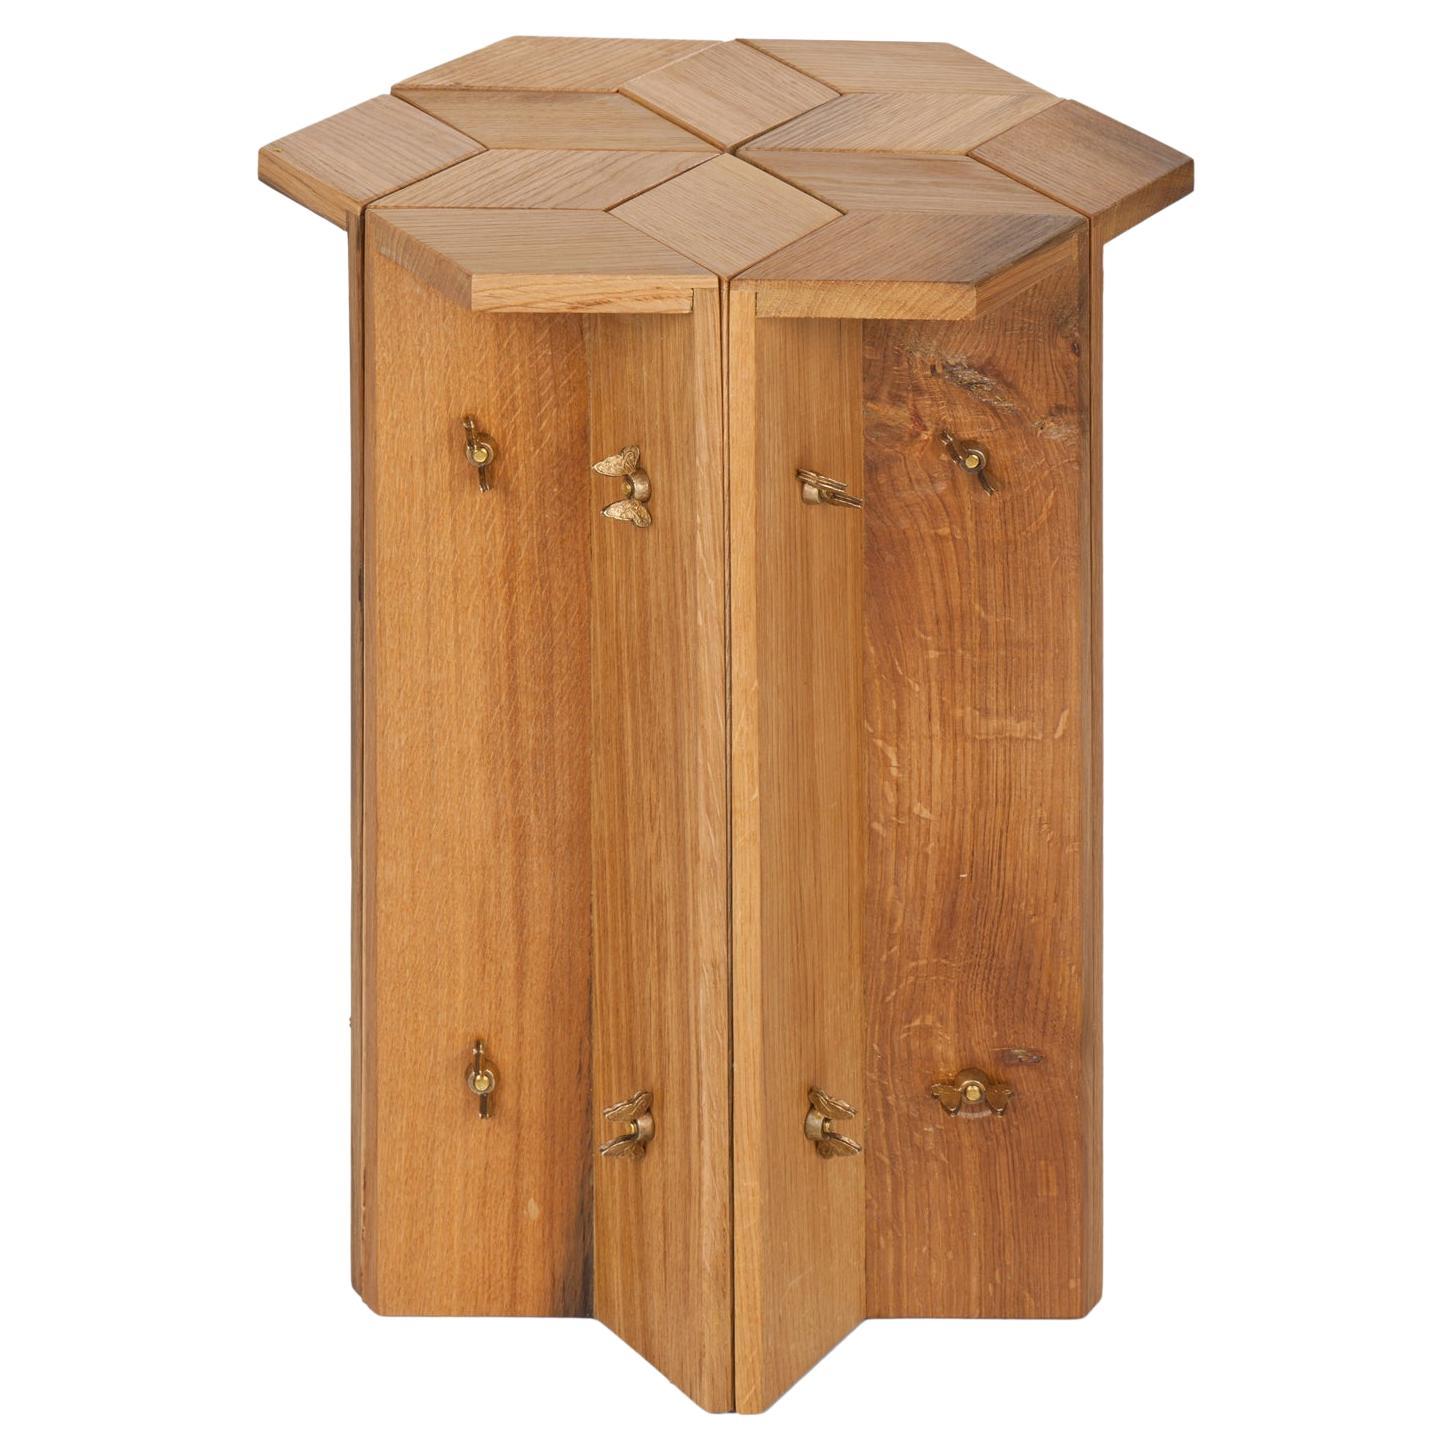 Mike Reclaimed Oak Stool by Fred and Juul For Sale